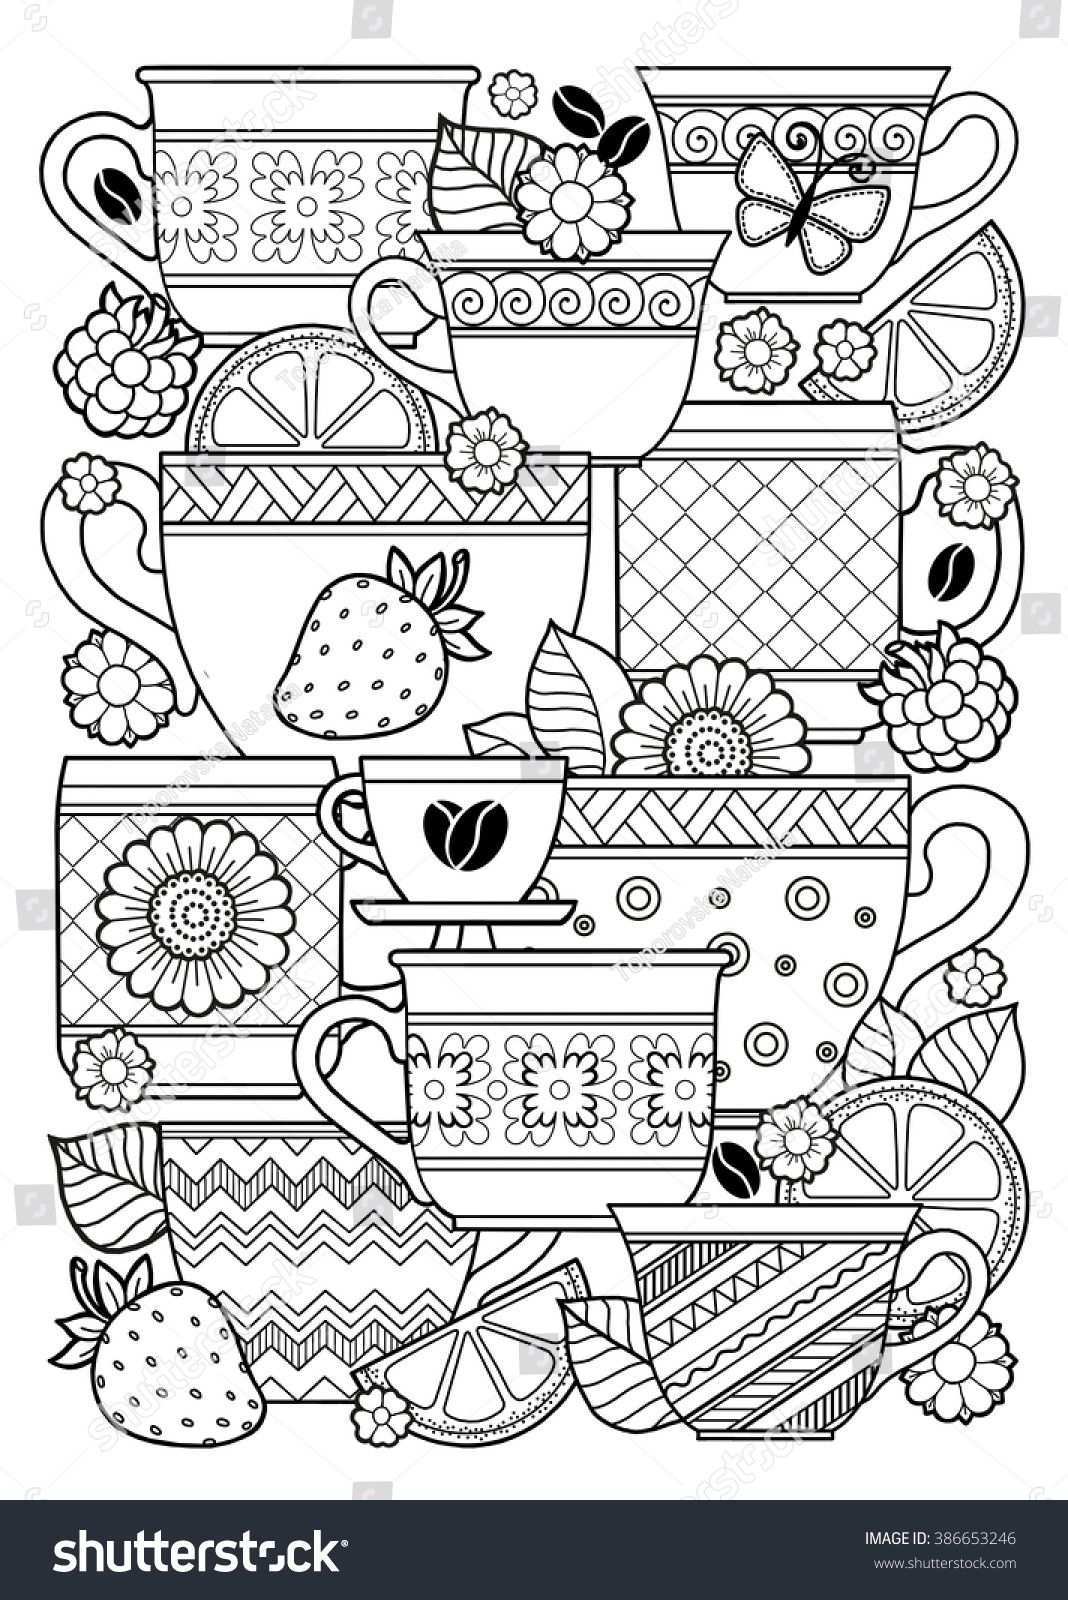 Pin En Colouring Pages